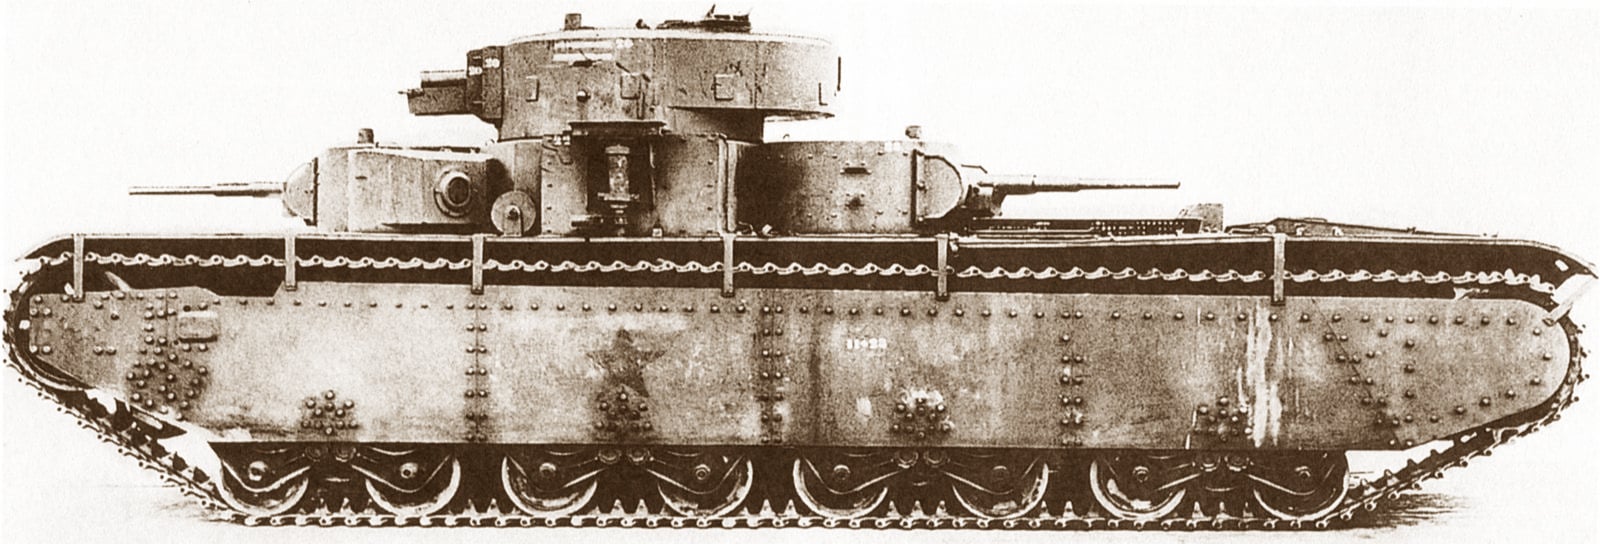 A black and white image of a Soviet T-35 heavy tank with a large turret in profile on a white background.